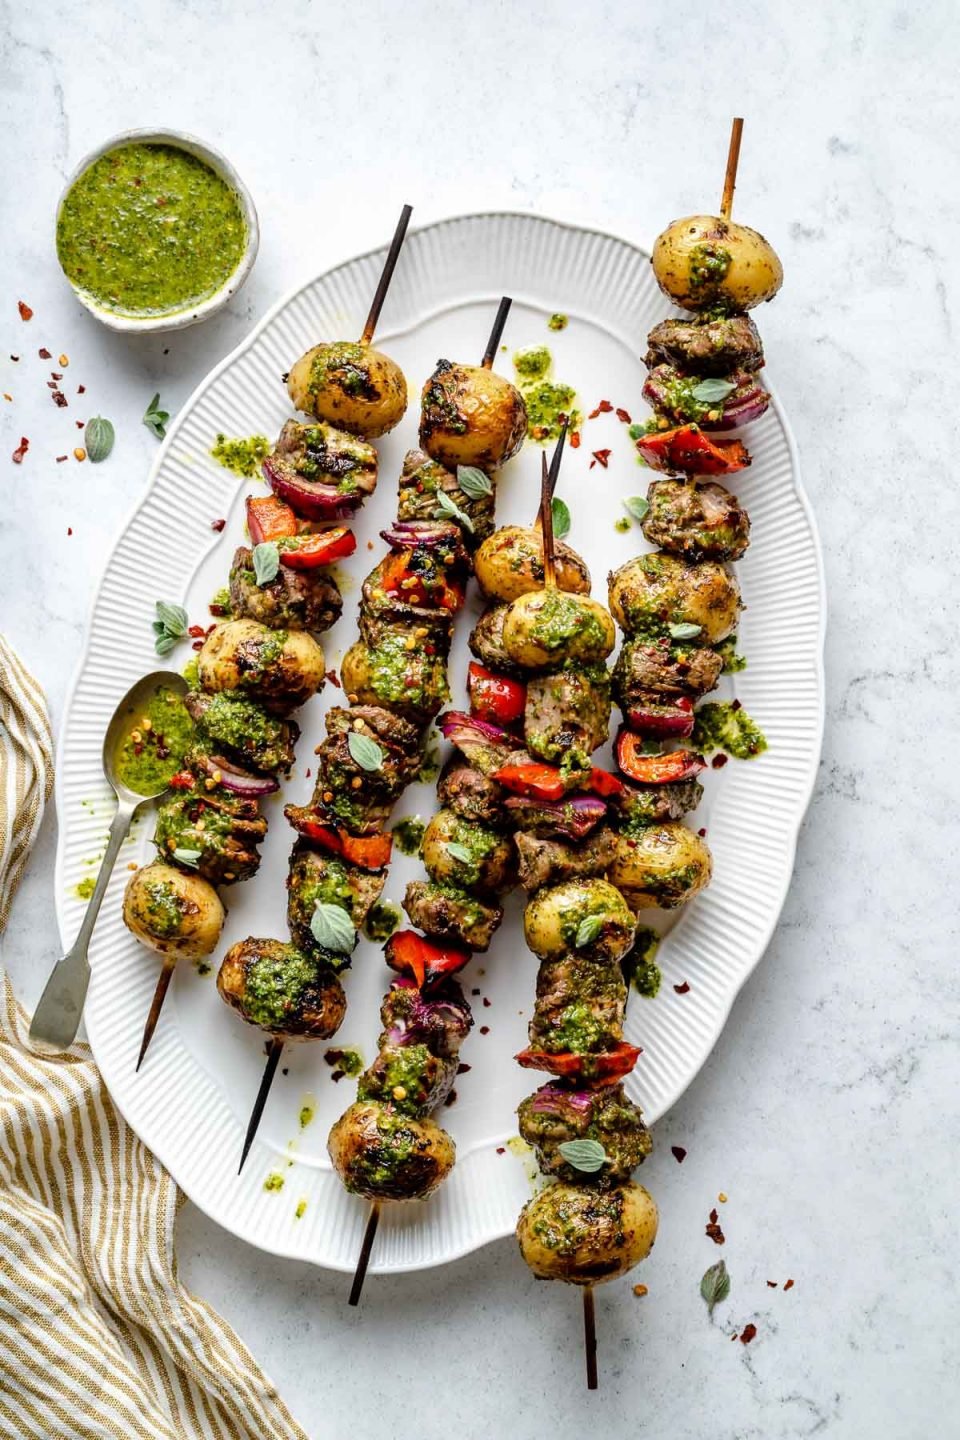 Grilled steak kabobs on a large white oval serving dish, drizzled with chimichurri sauce. The dish sits atop a light blue marbled surface, alongside a small dish of chimichurri sauce & a gold & white striped linen napkin.